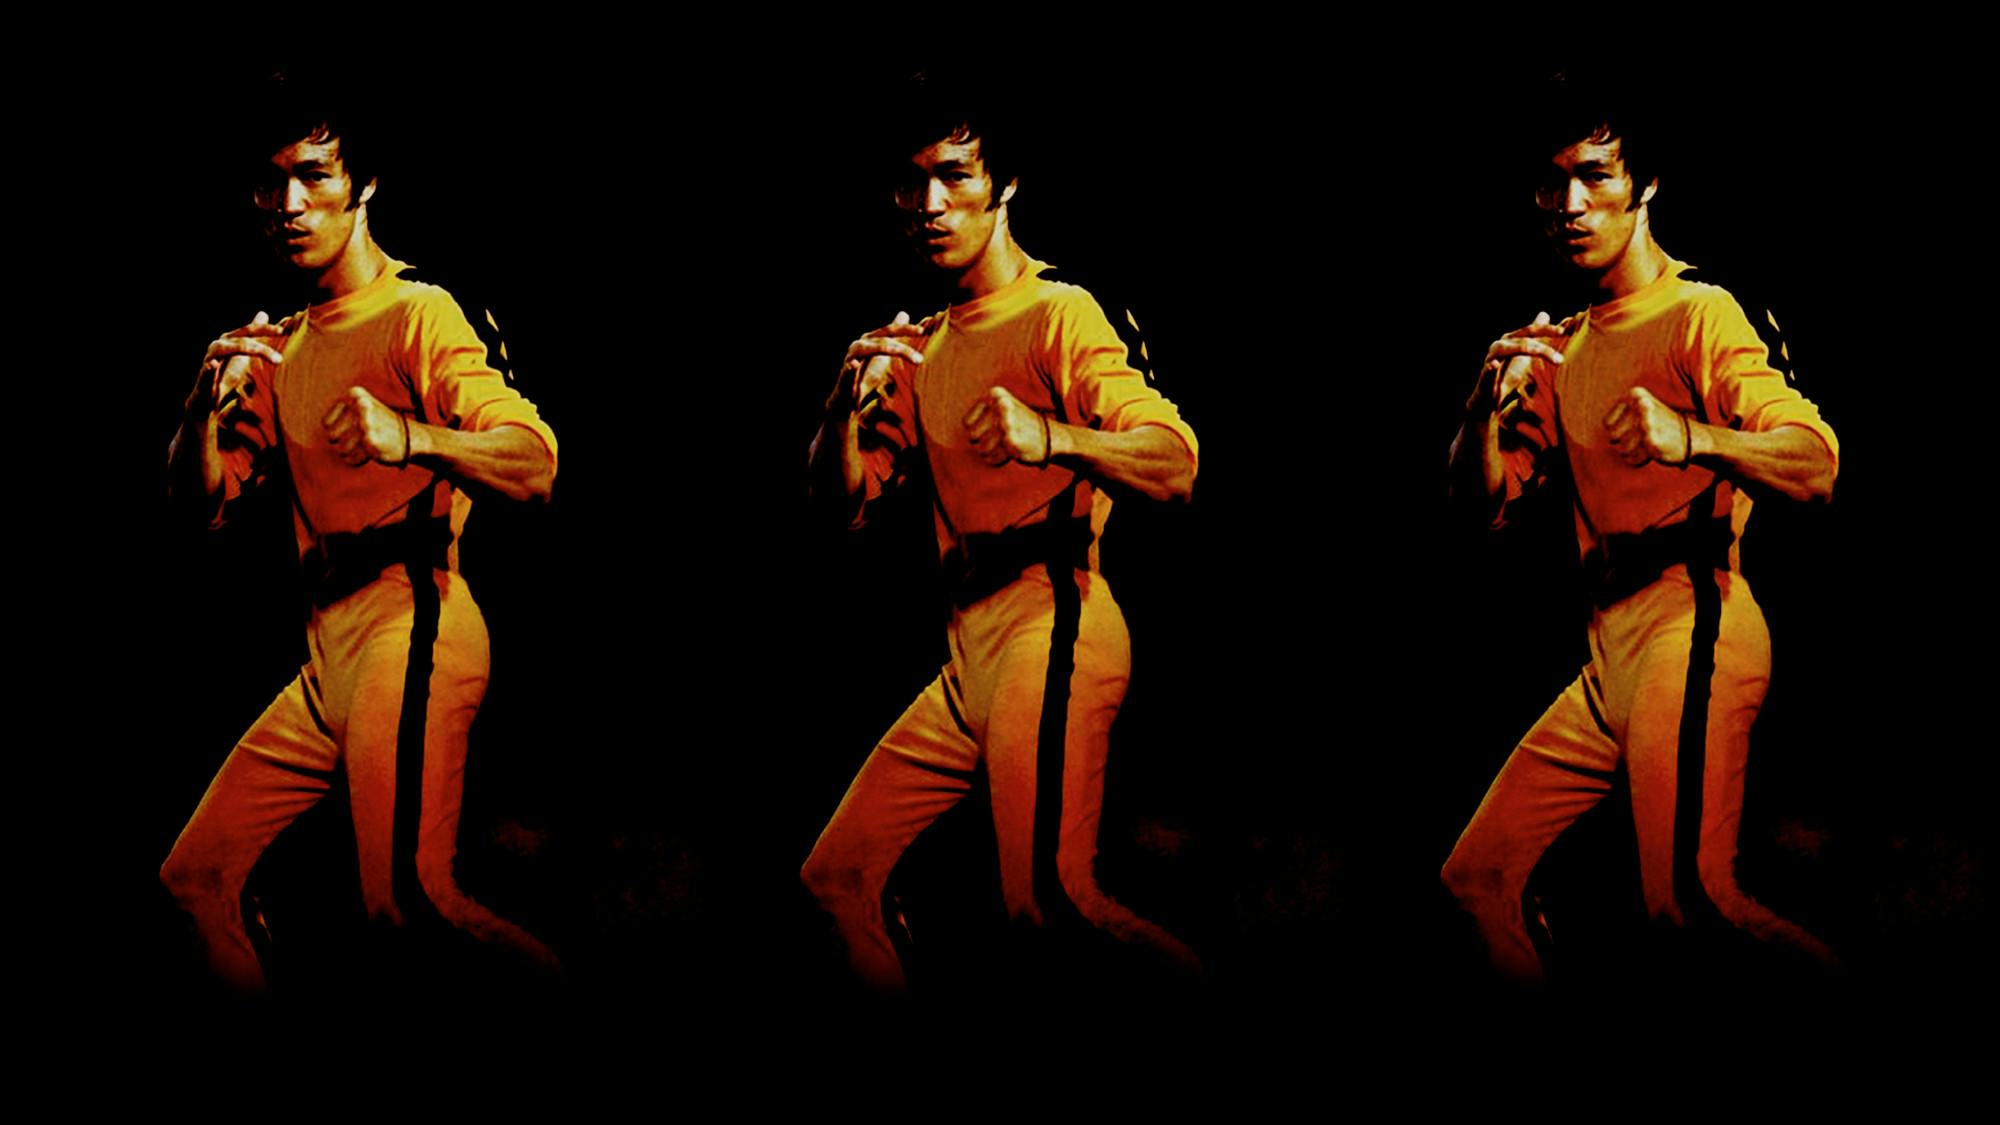 Bruce Lee in iconic yellow jumpsuit